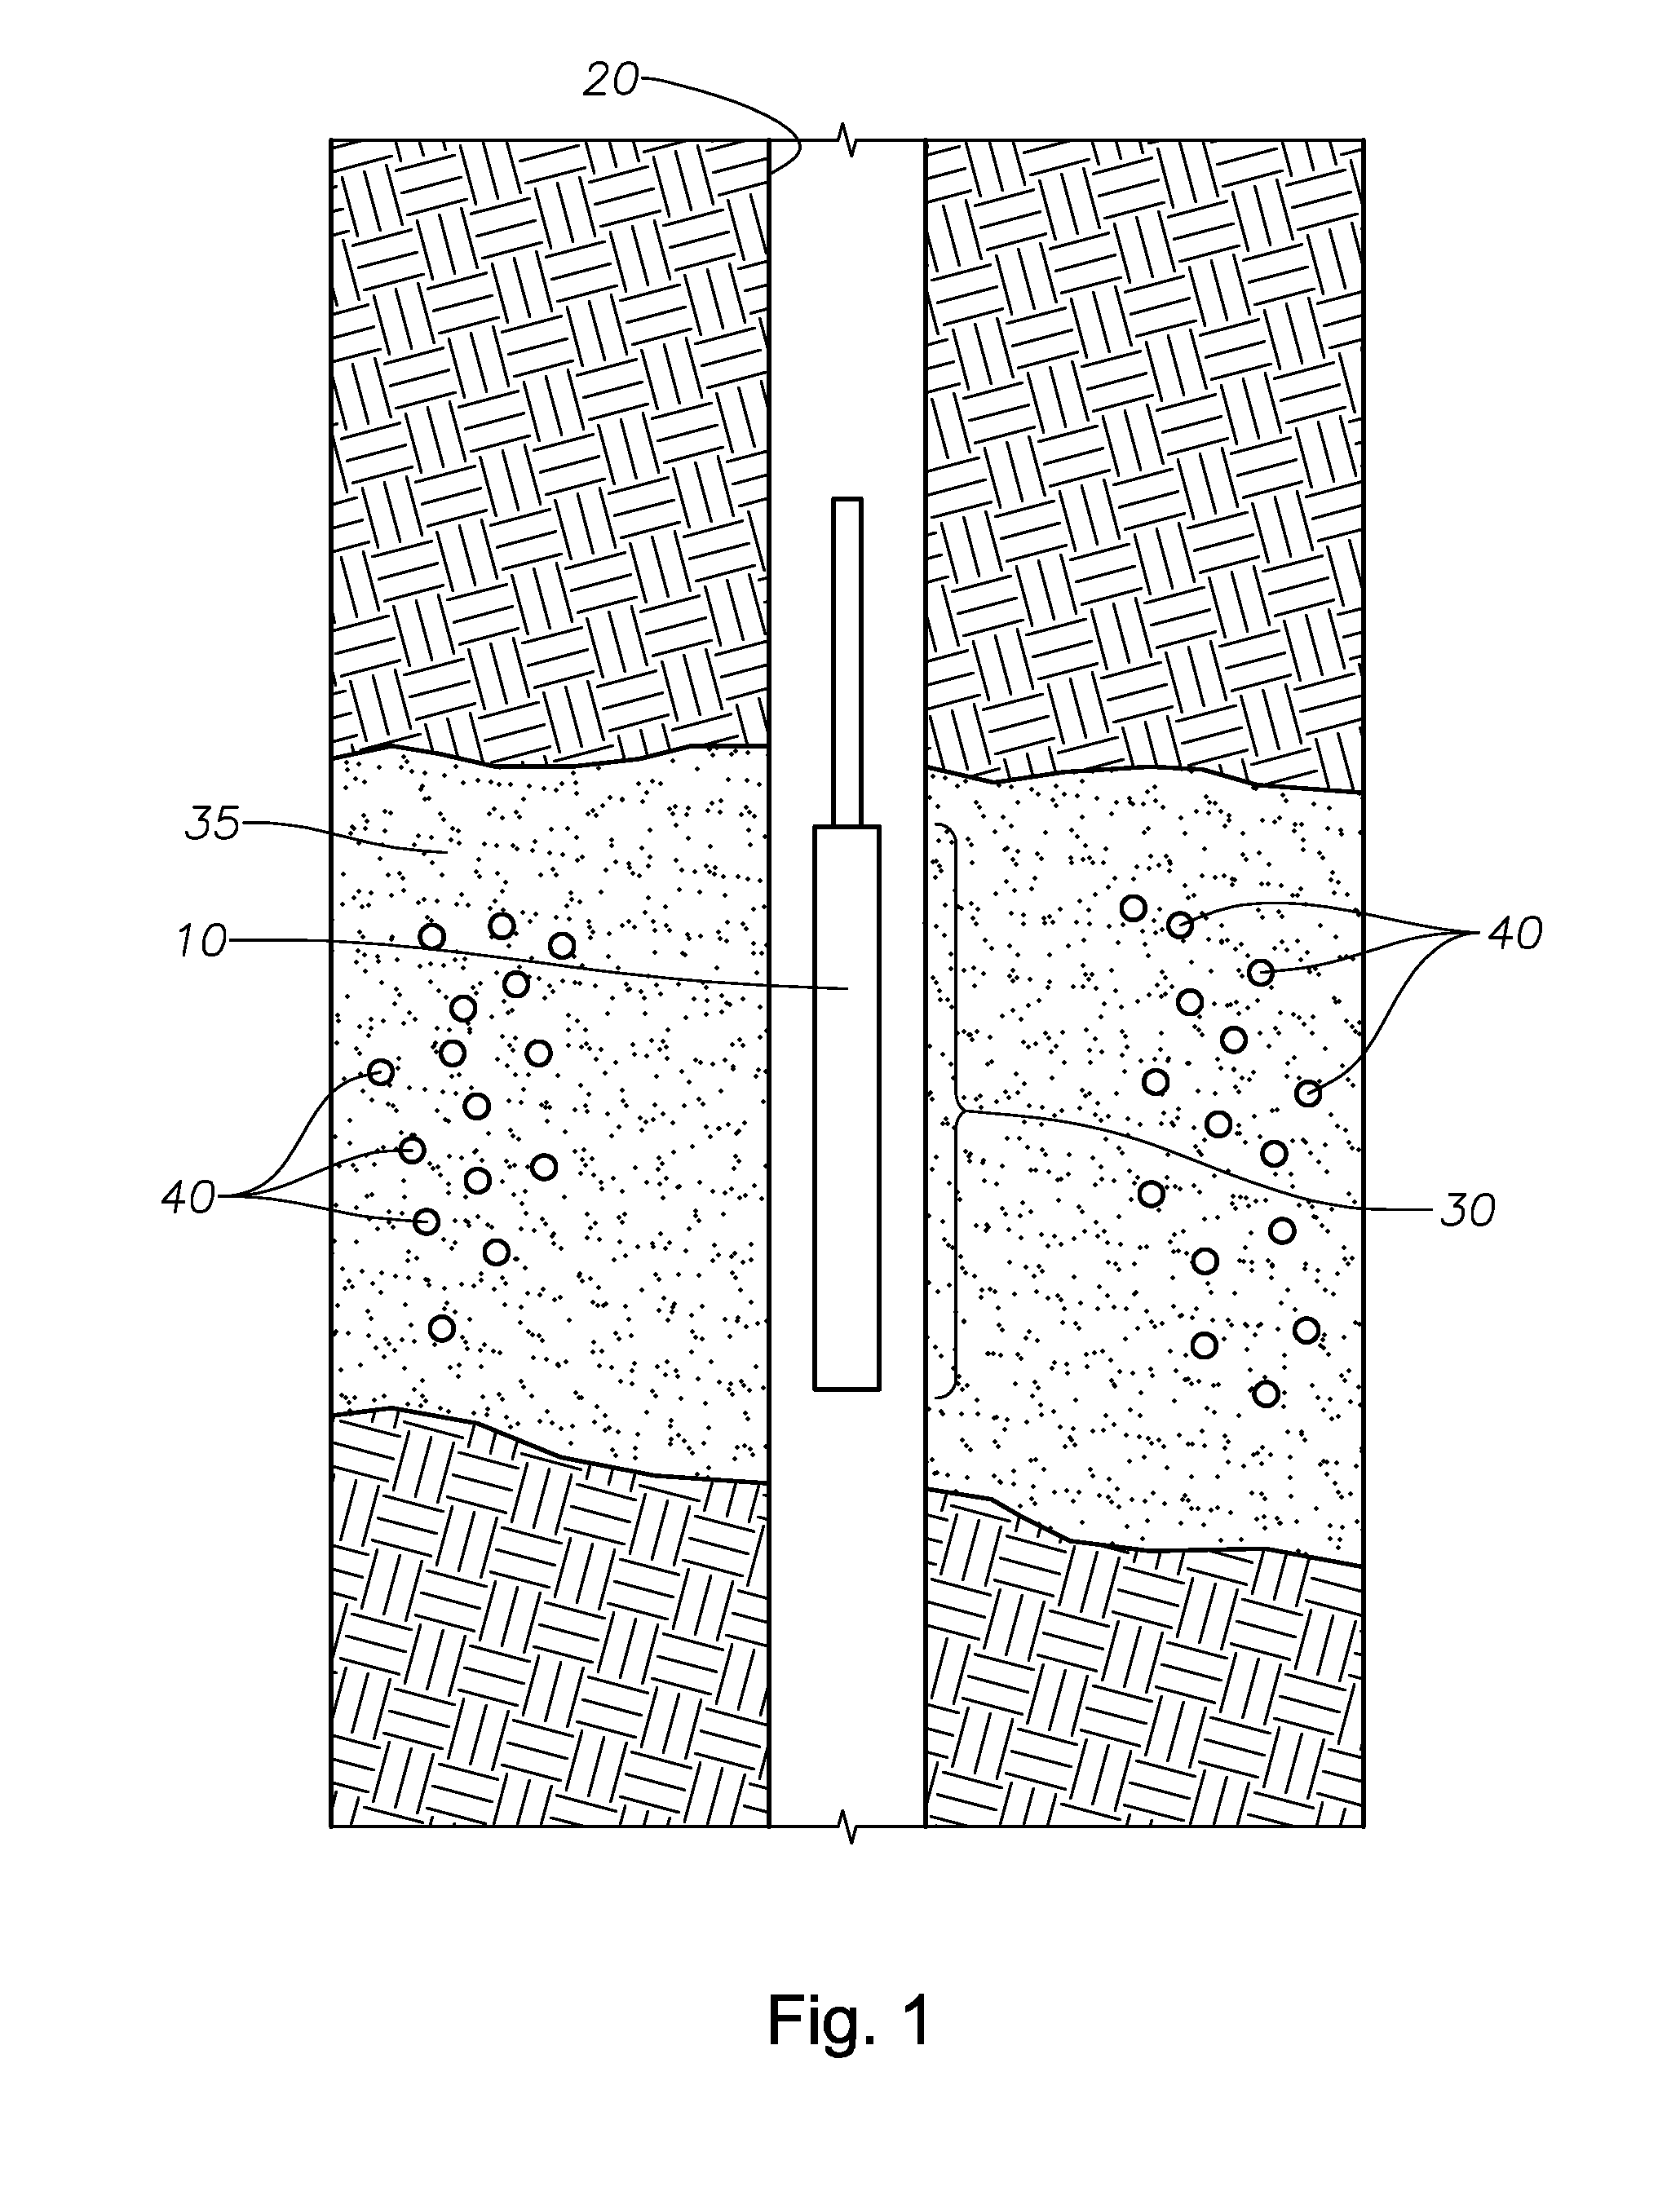 Sand production control through the use of magnetic forces